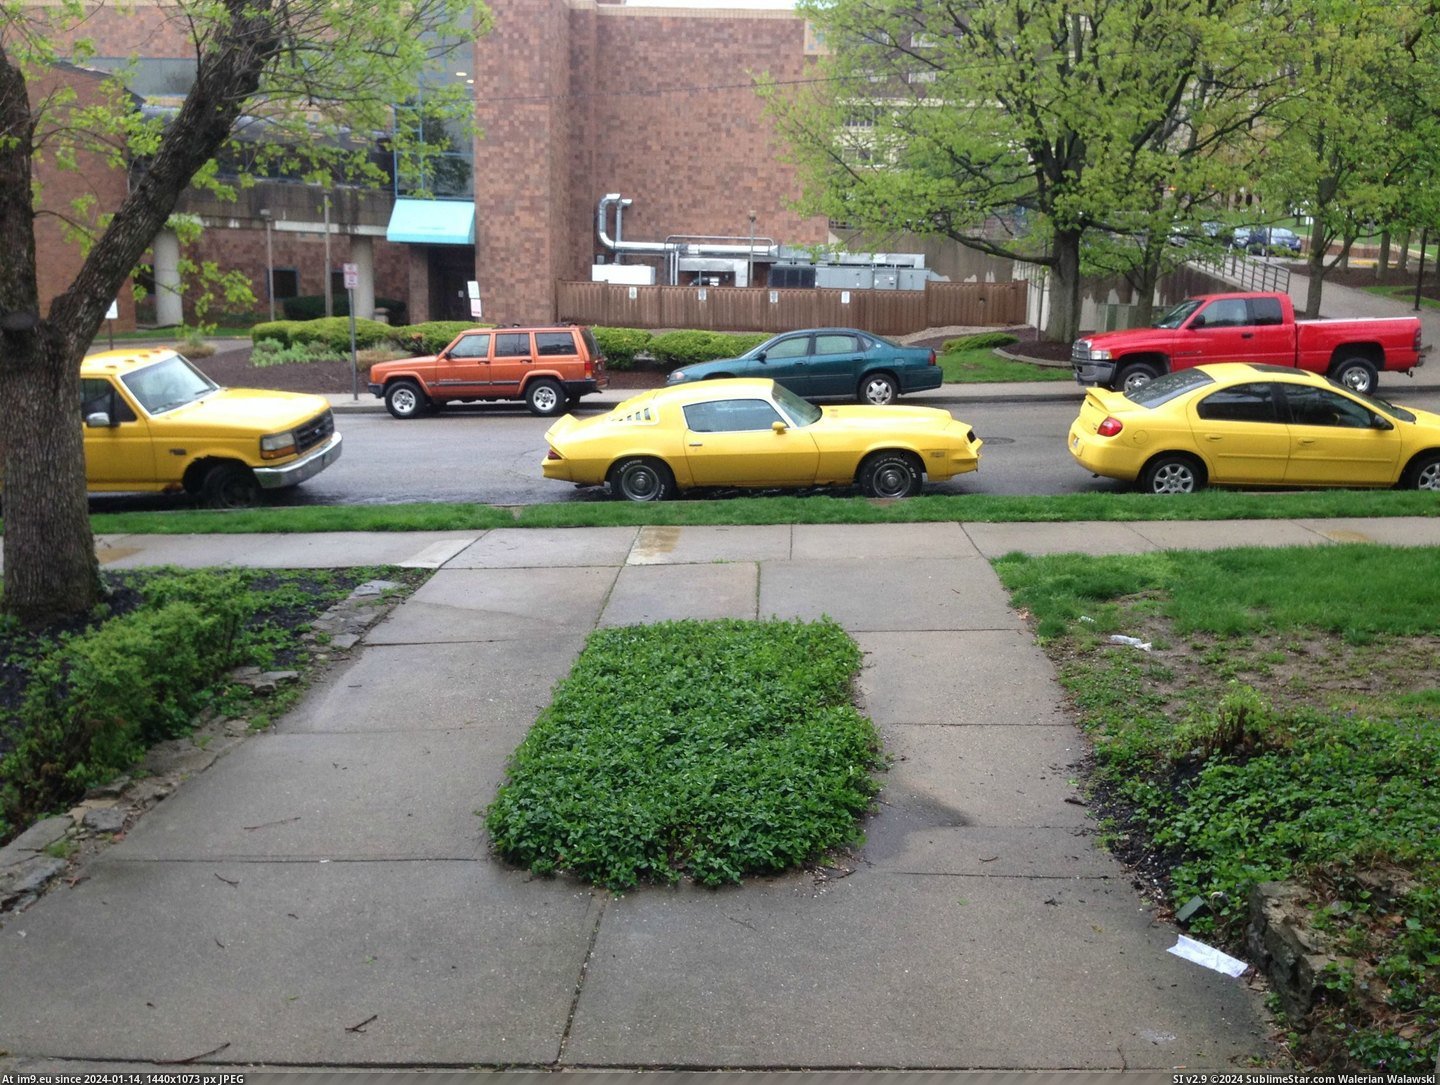 #Morning #Apartment #Row #Parked #Yellow #Cars [Mildlyinteresting] These 3 yellow cars were parked in a row outside my apartment this morning Pic. (Bild von album My r/MILDLYINTERESTING favs))